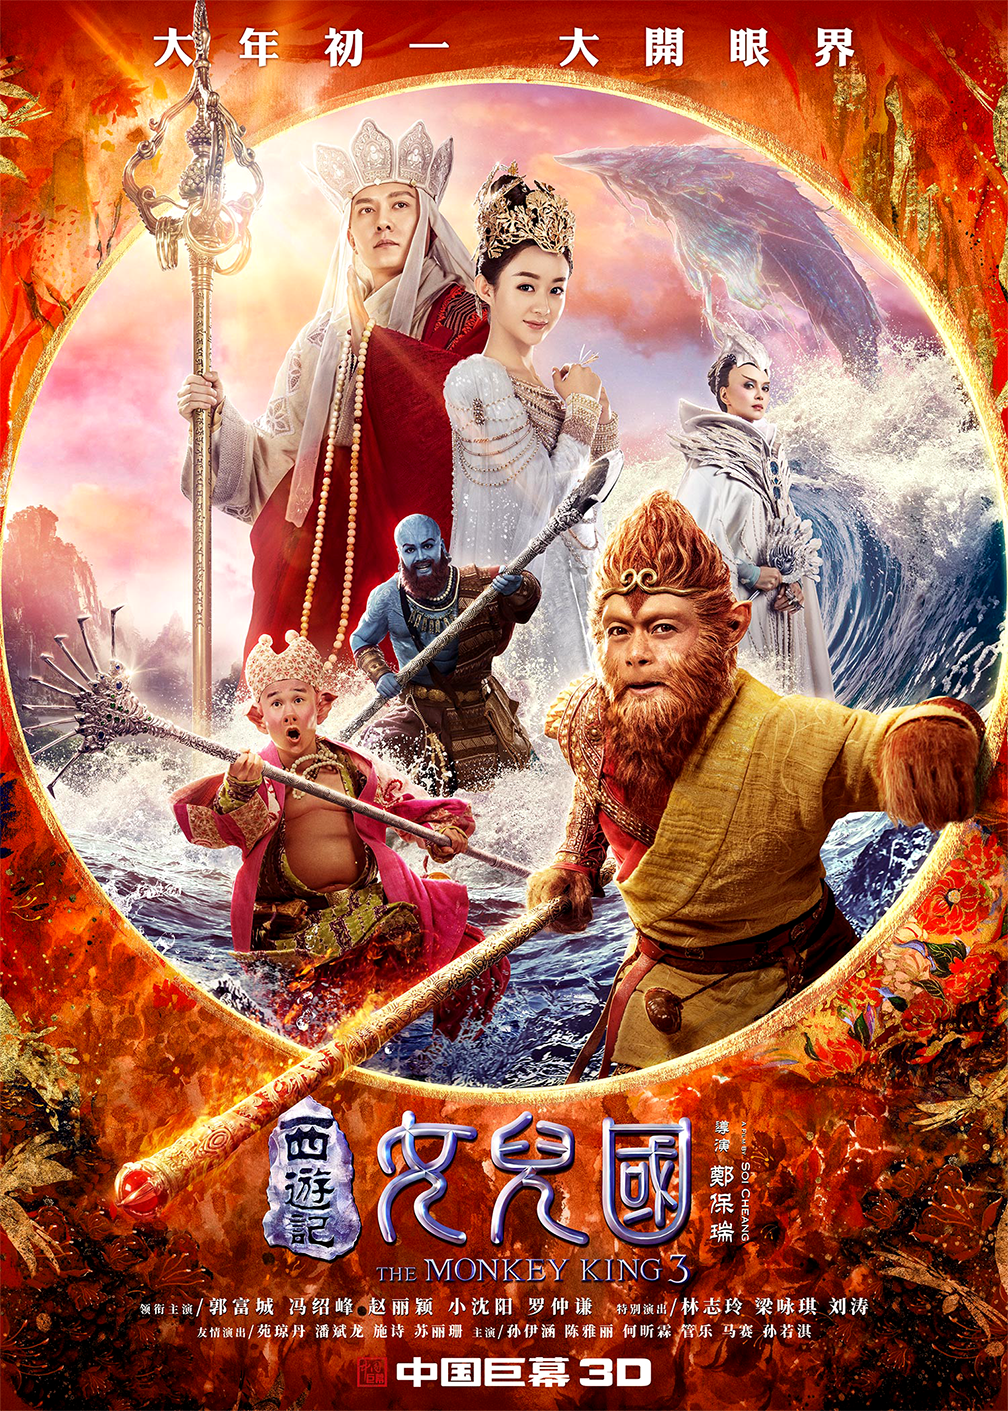 They don’t monkey around do they? ‘Monkey King 4’ is coming